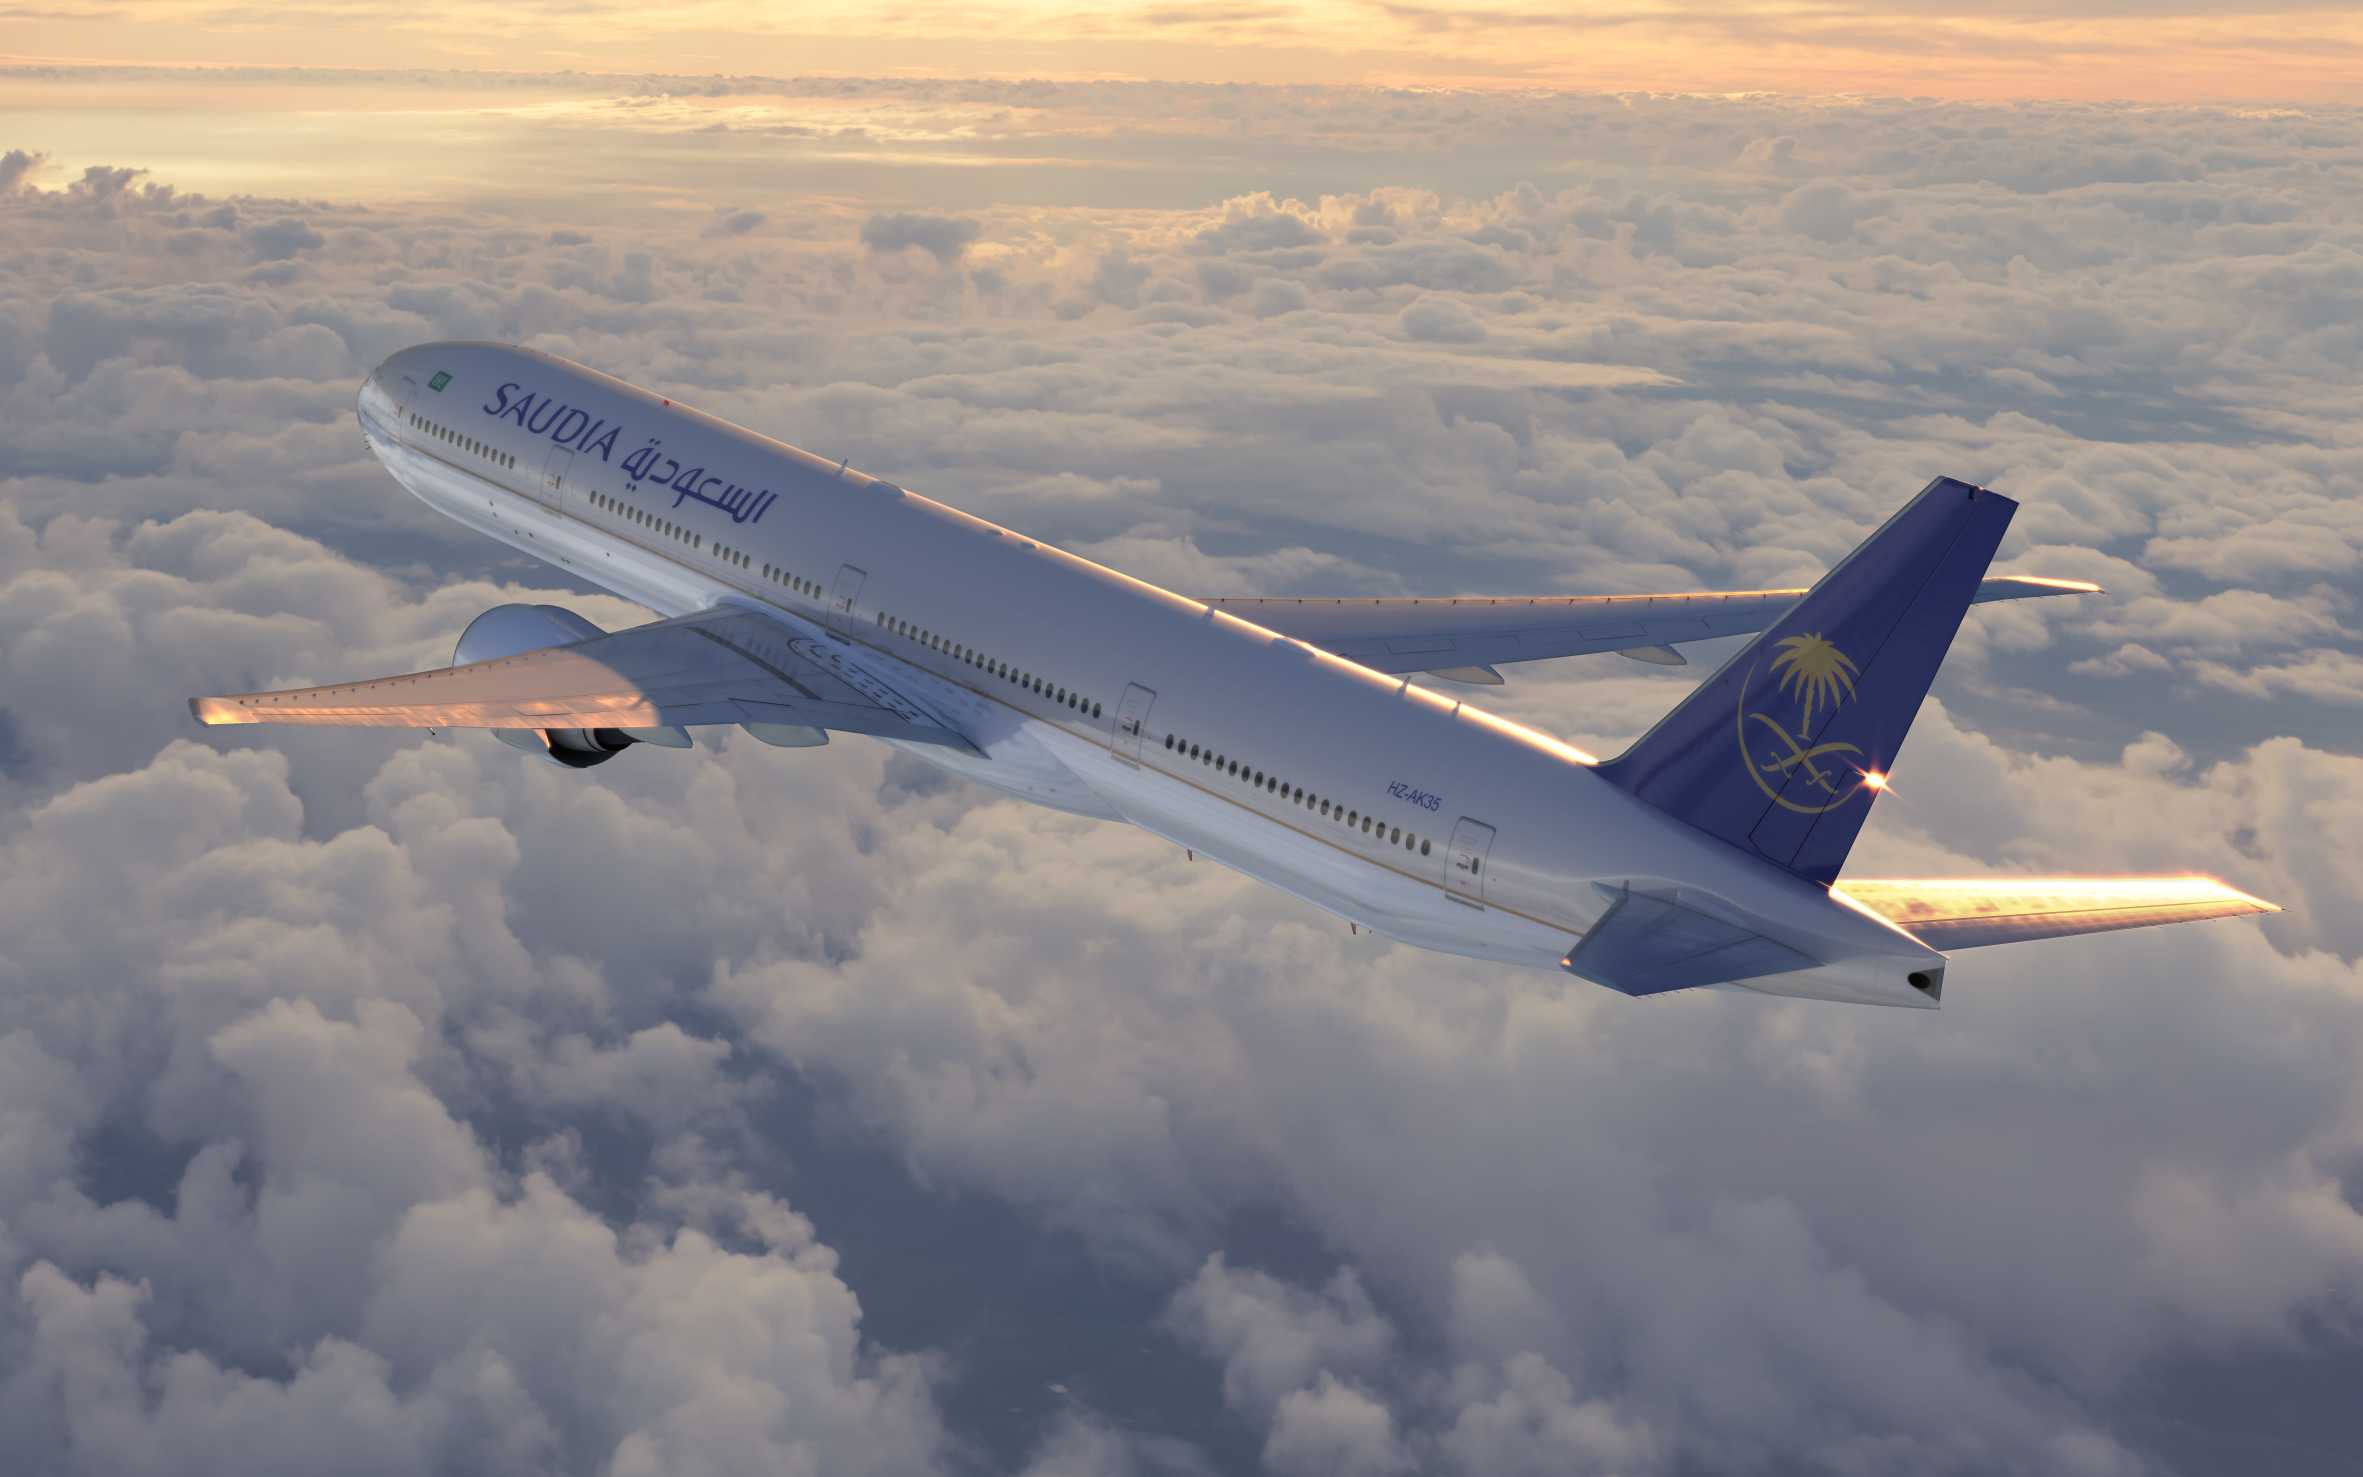 https://highend-traveller.com/traversing-across-continents-saudia-airlines-is-here-to-let-travel-dreams-take-flight/